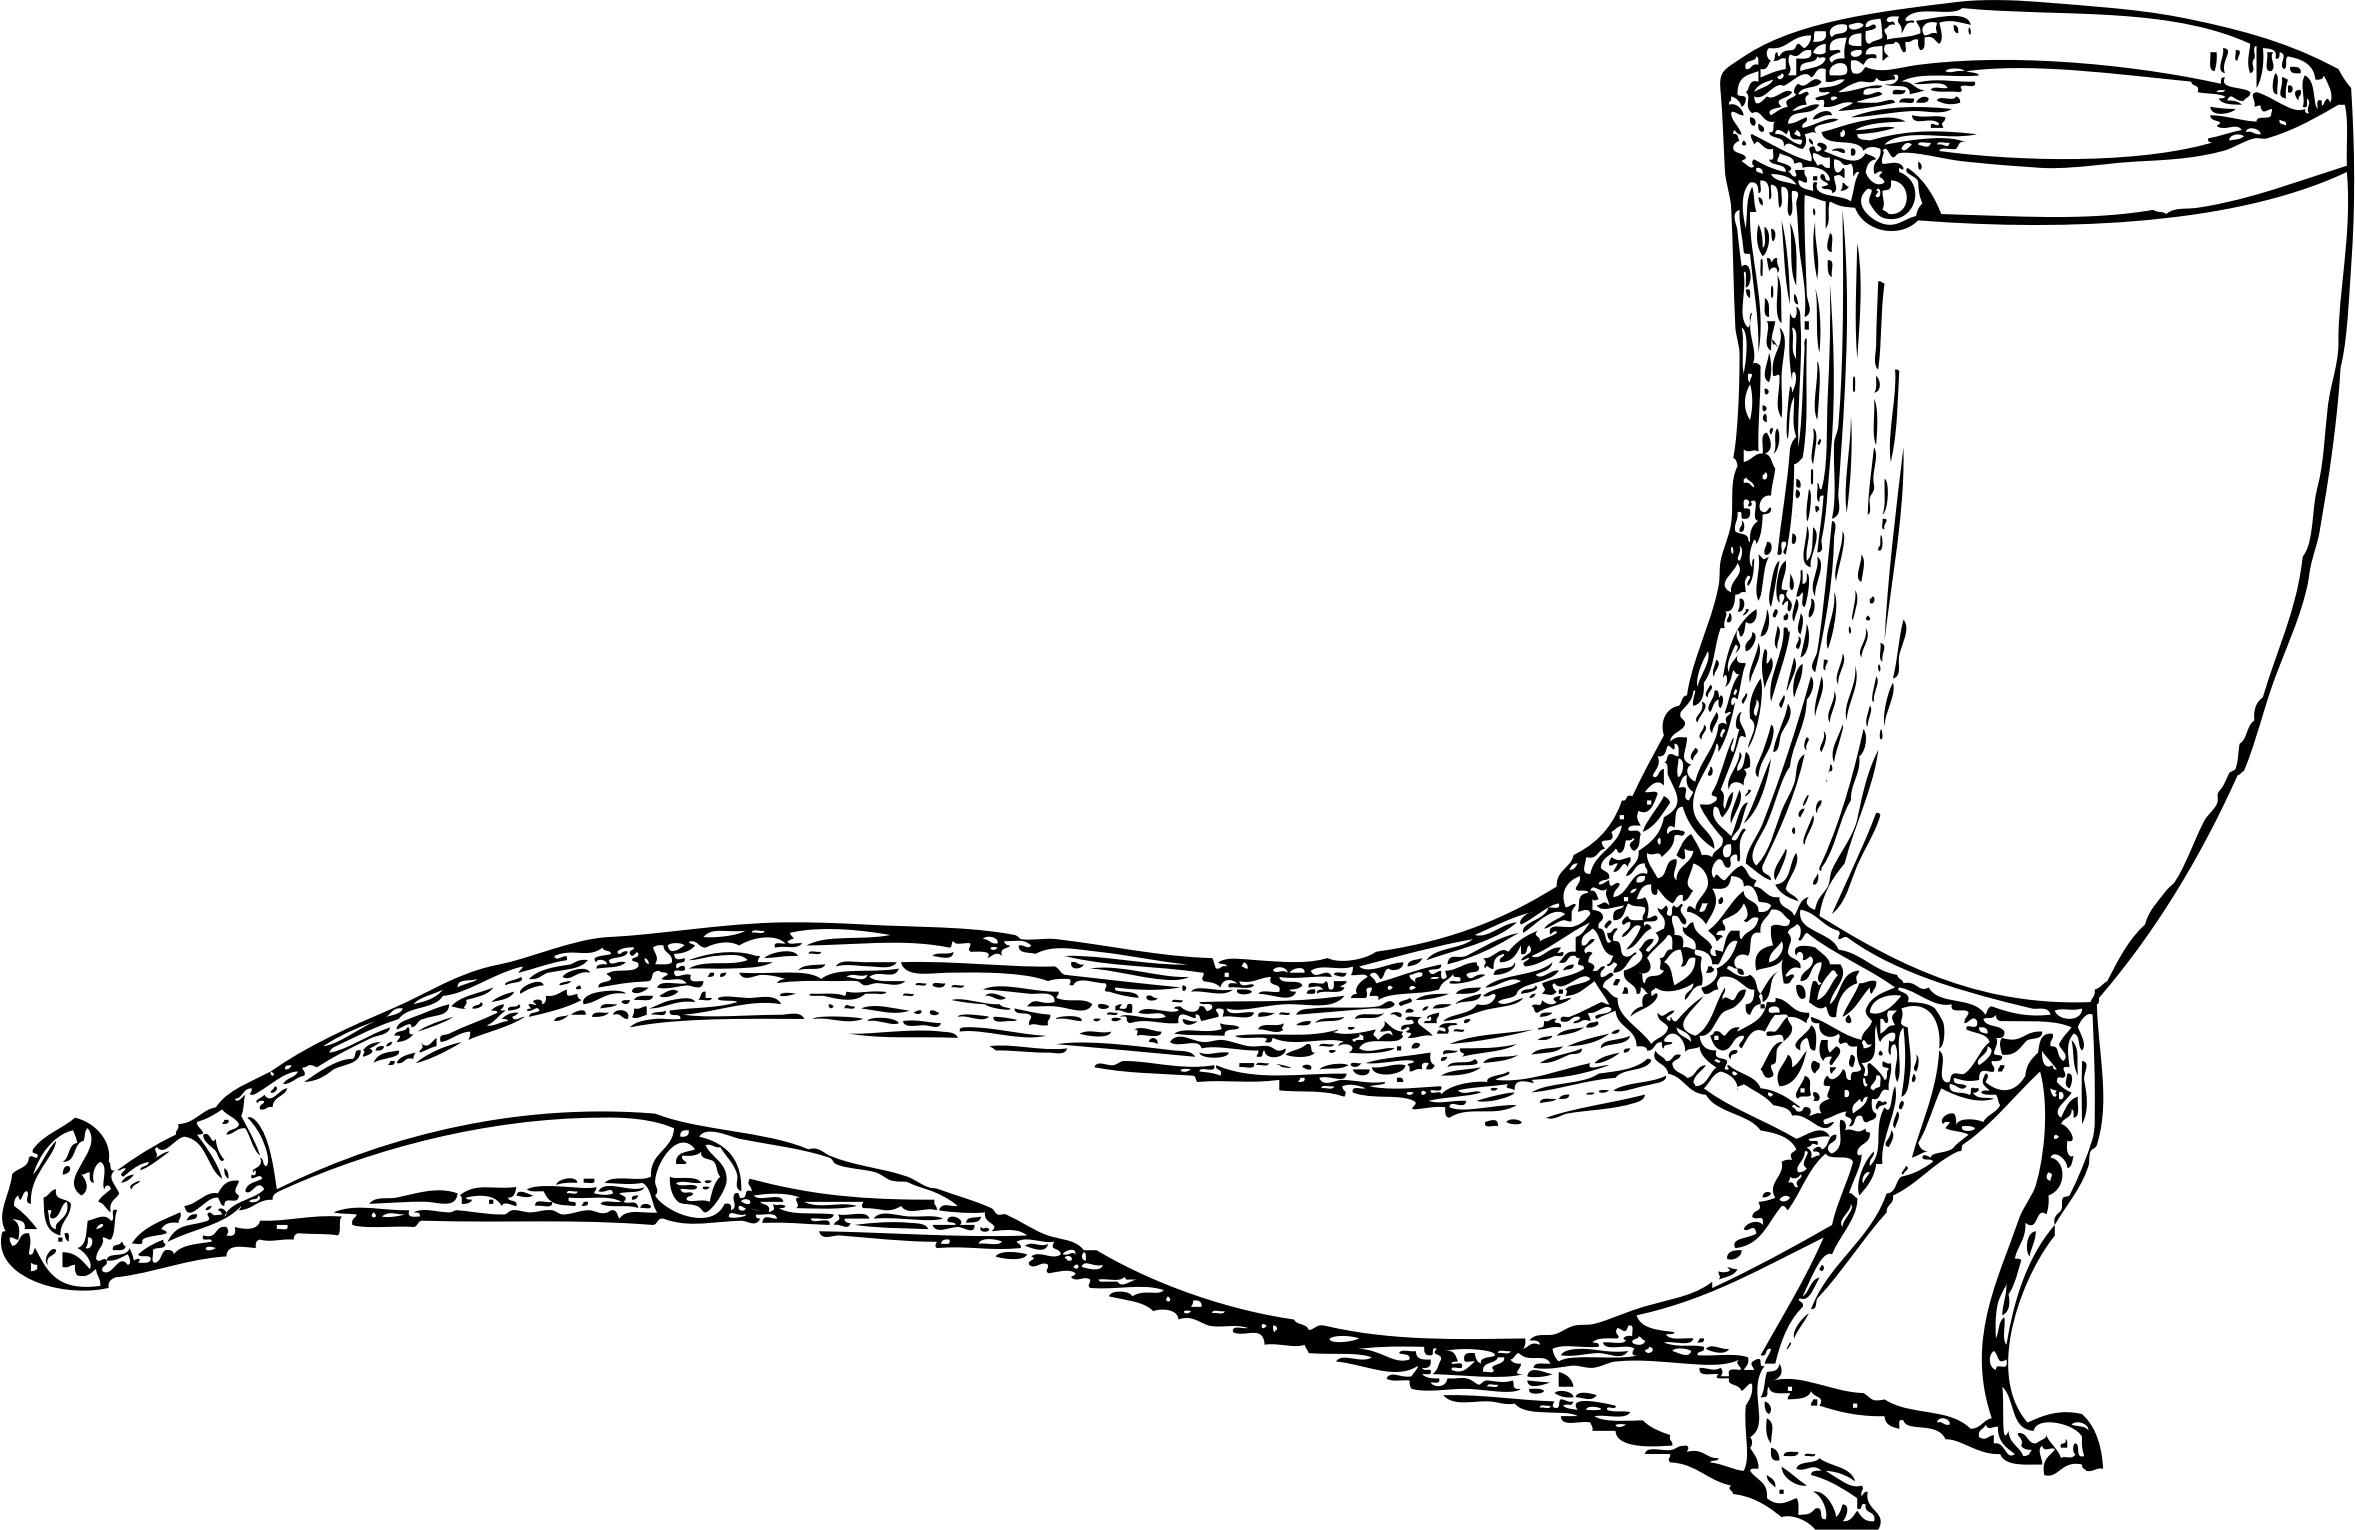 drinking horn png